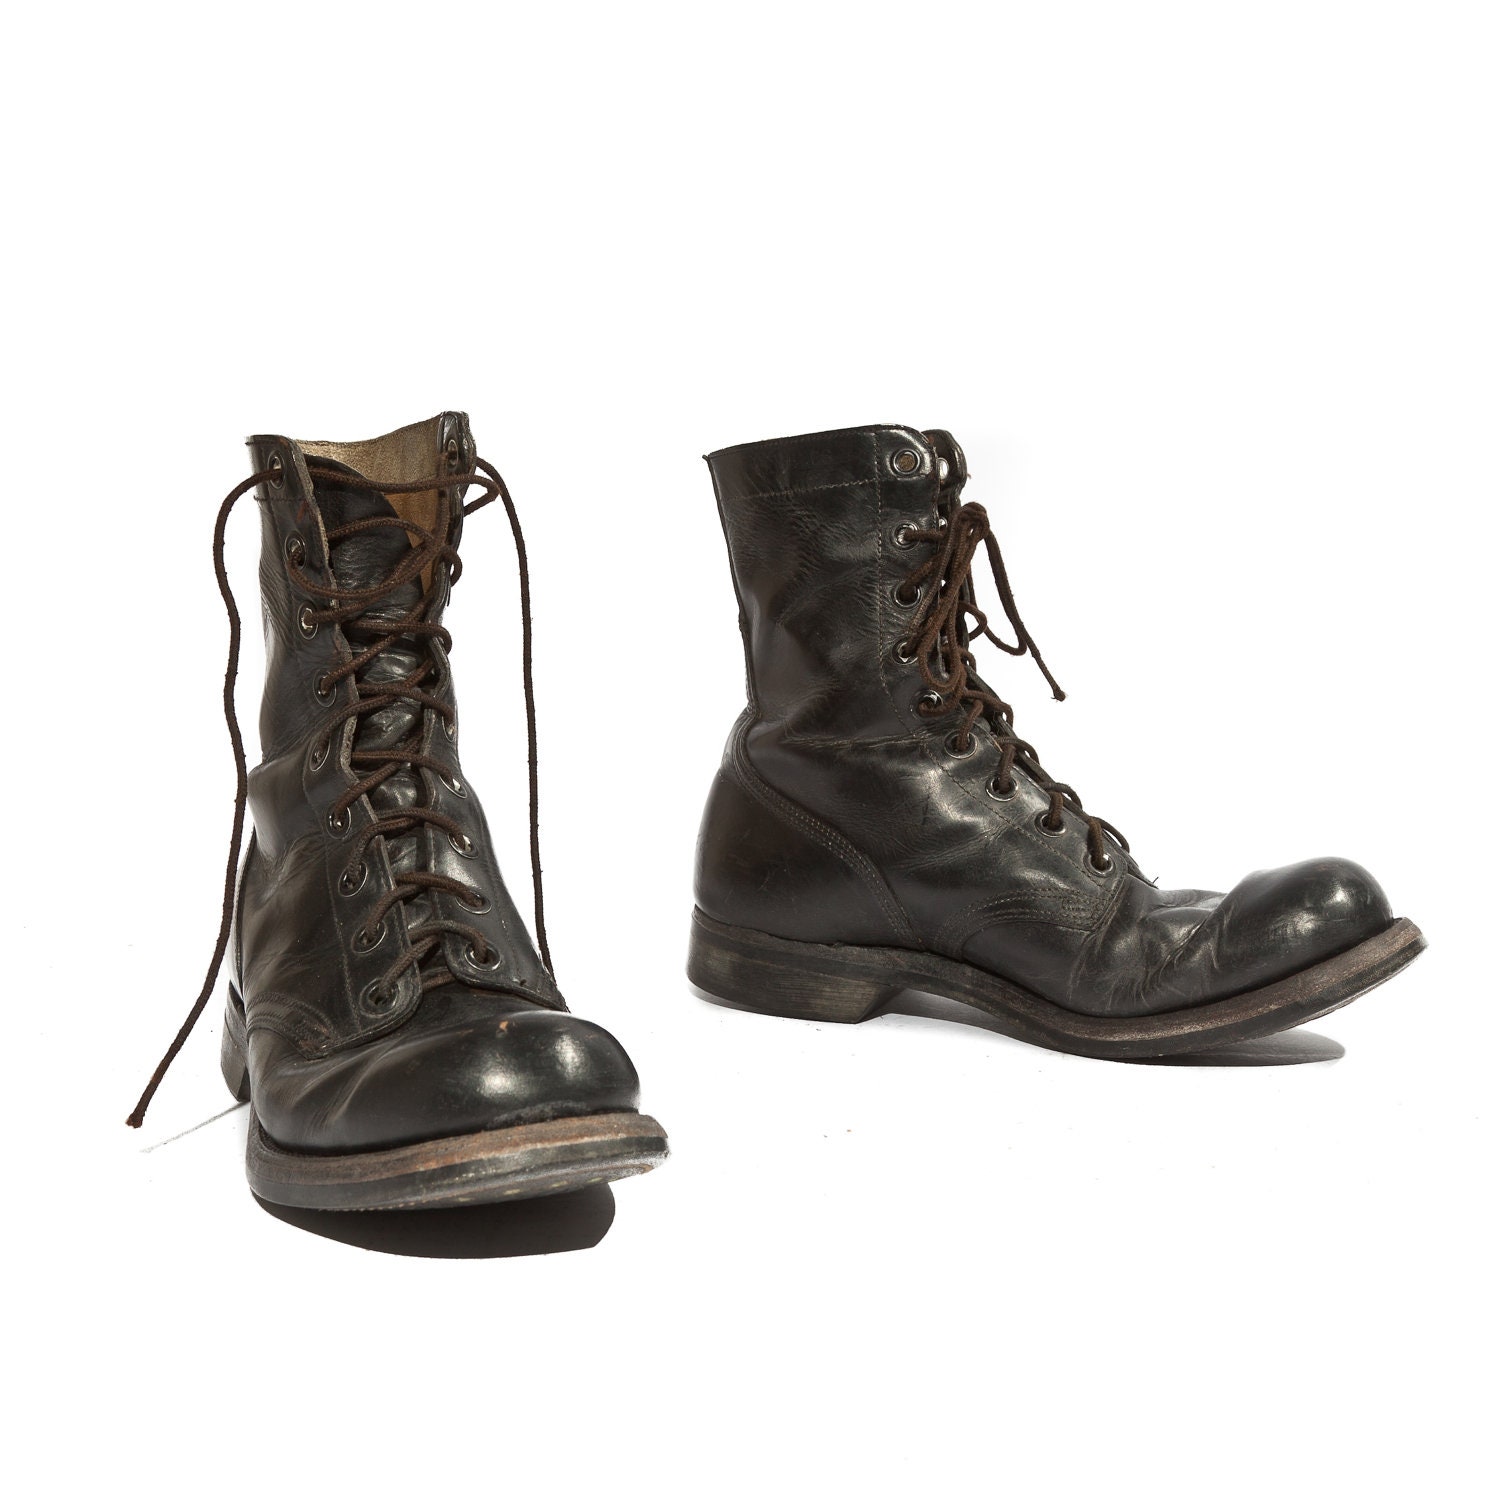 Vintage Military Boot 20